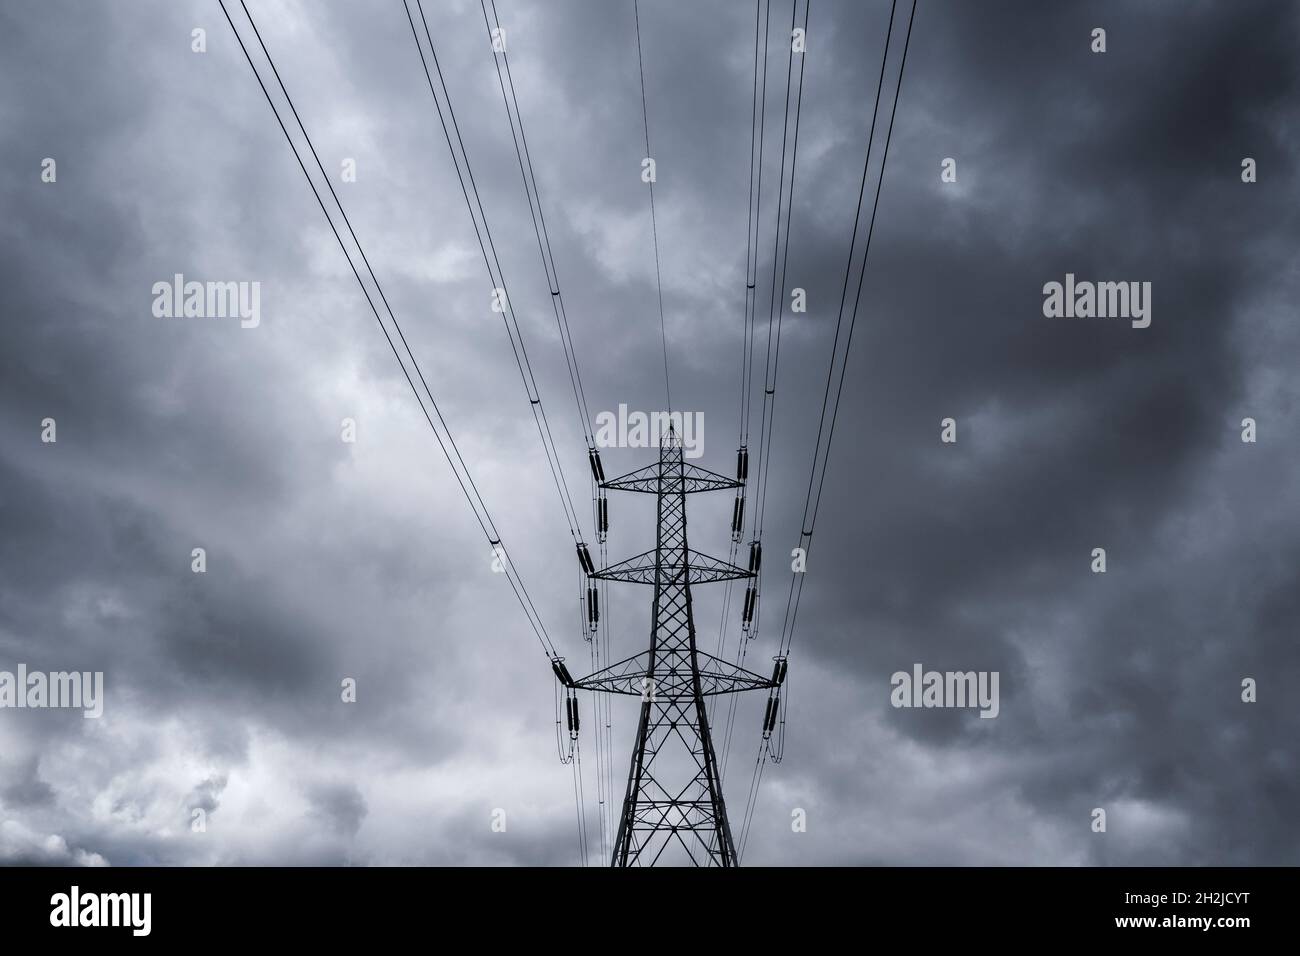 An electricity power supply pylon set against a heavily clouded grey sky, Worcestershire, England. Stock Photo